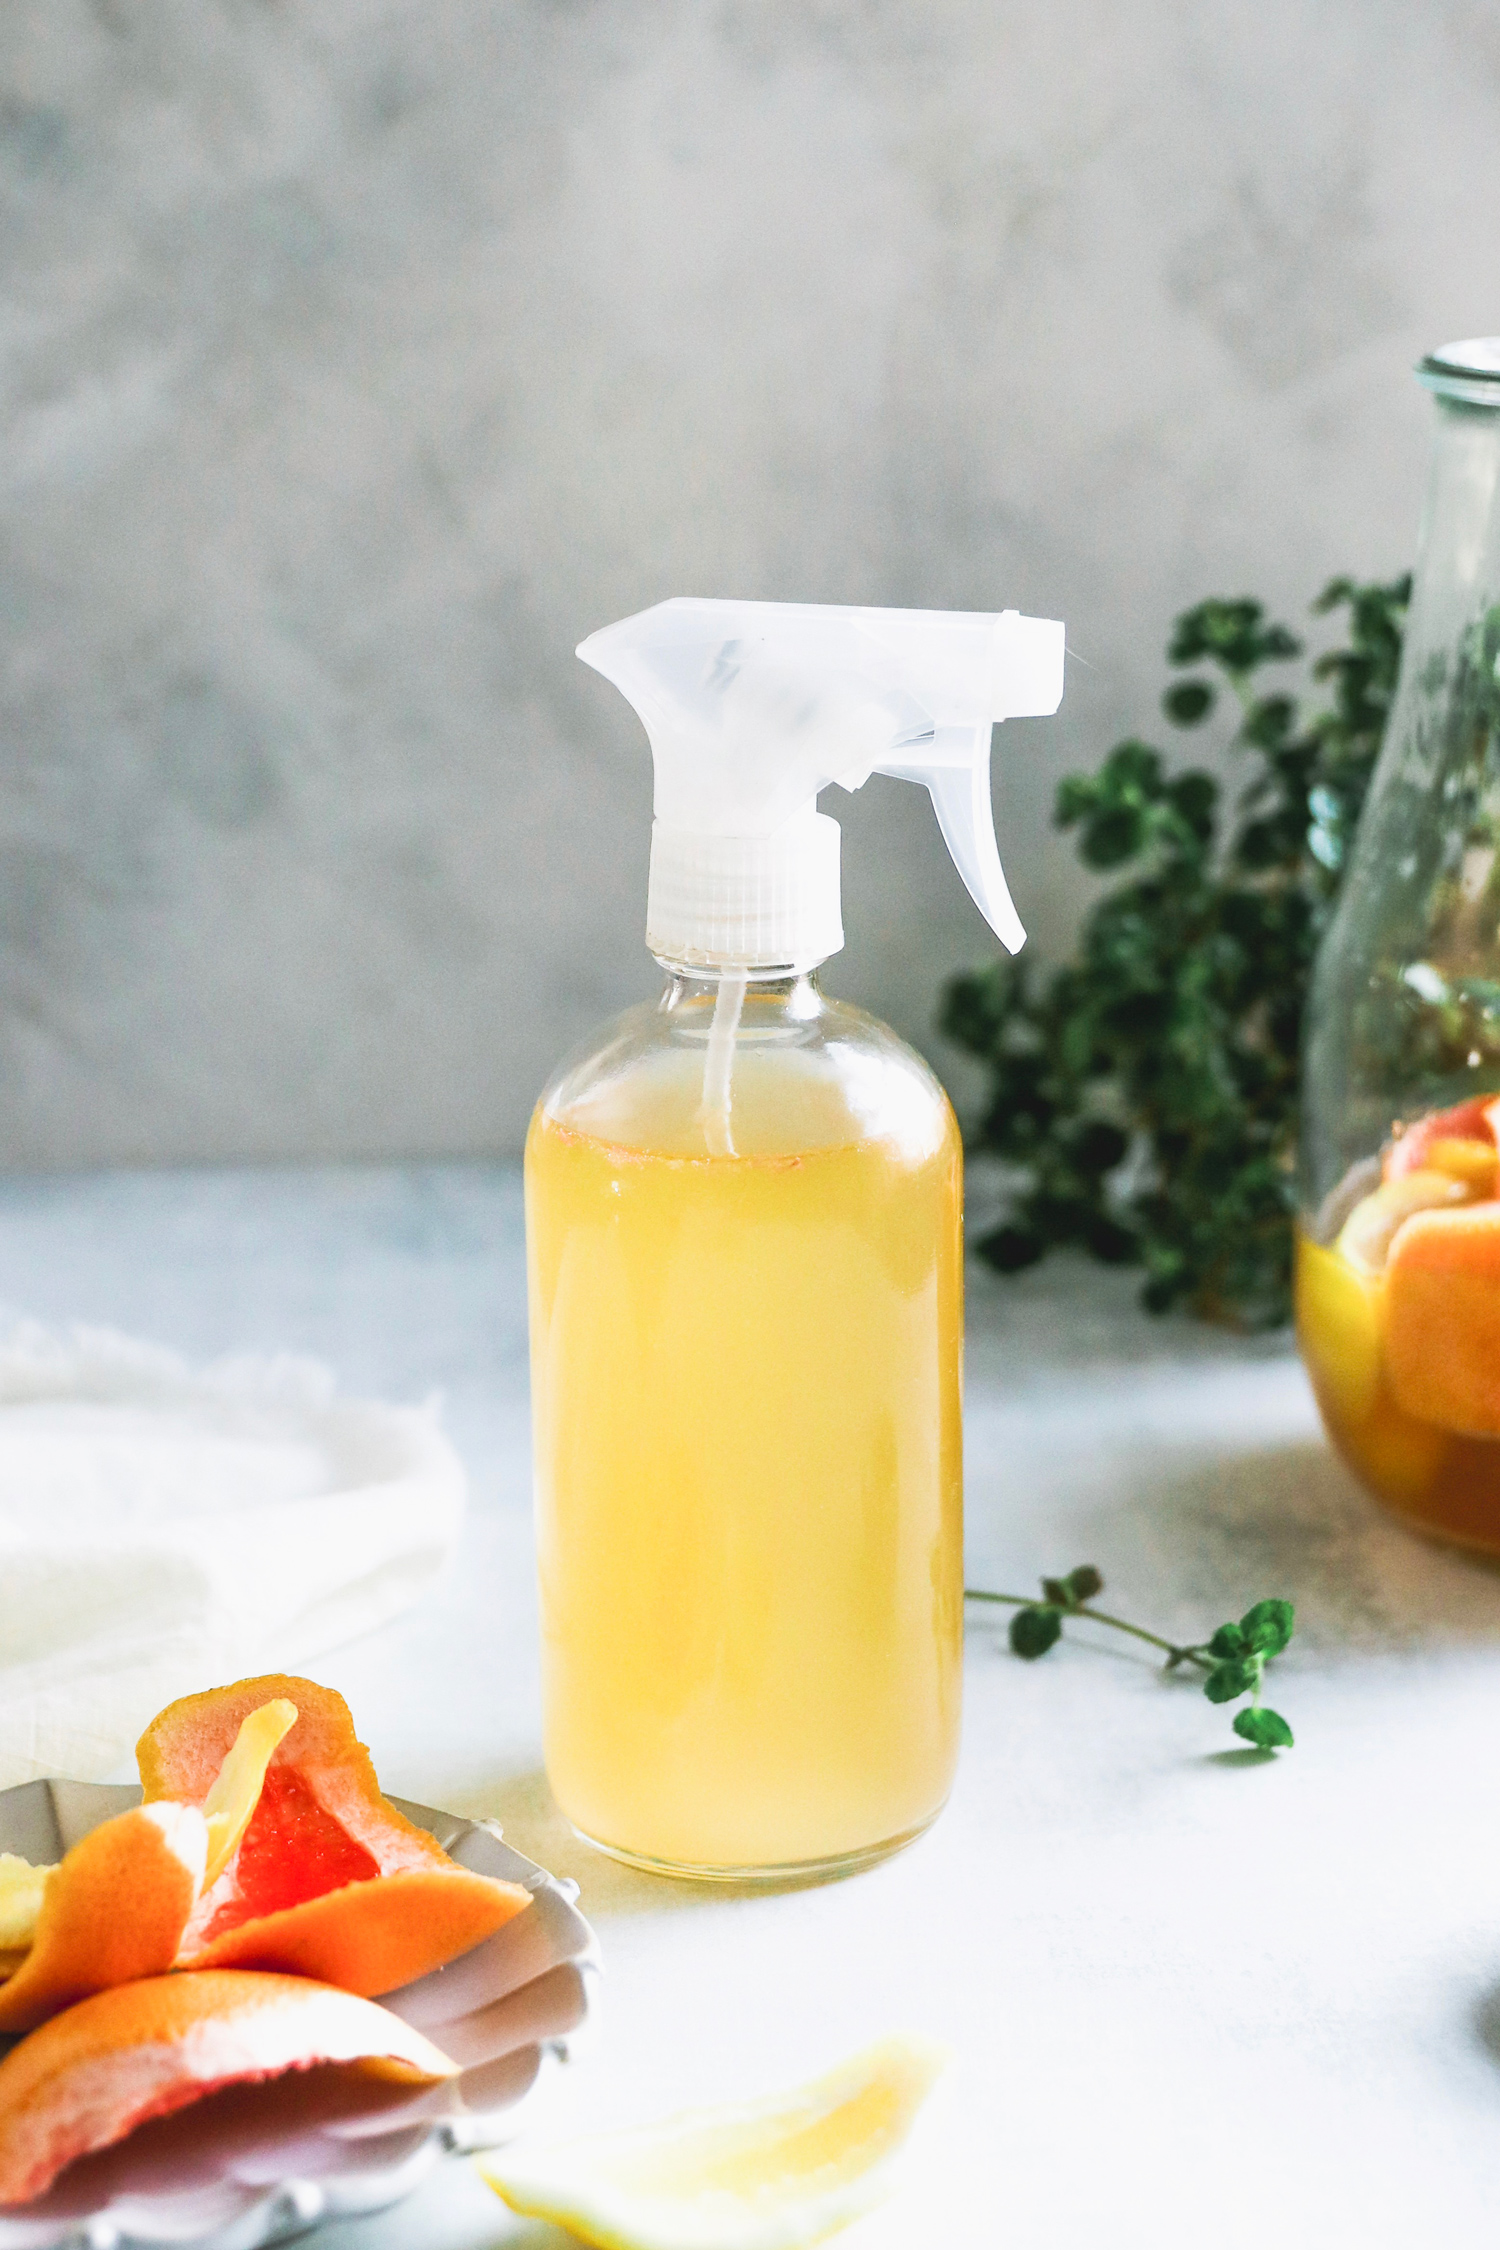 This enzyme cleaner is surprisingly easy to make using ingredients already found in your kitchen. Use it to remove pet accidents, blood, and other stains.